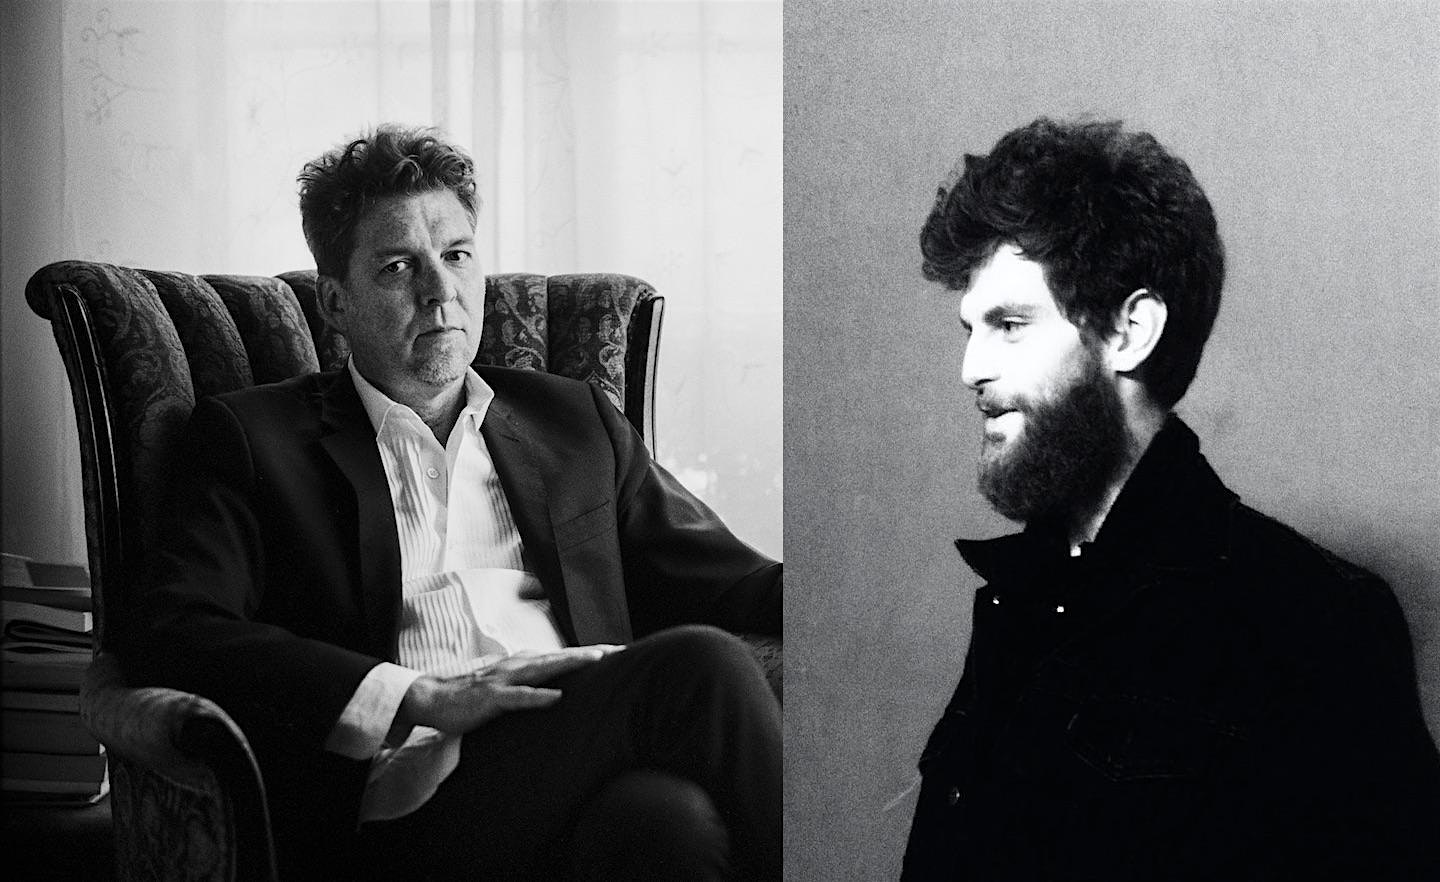 Joe Henry and Ross Gallagher's 'neon night' with strings